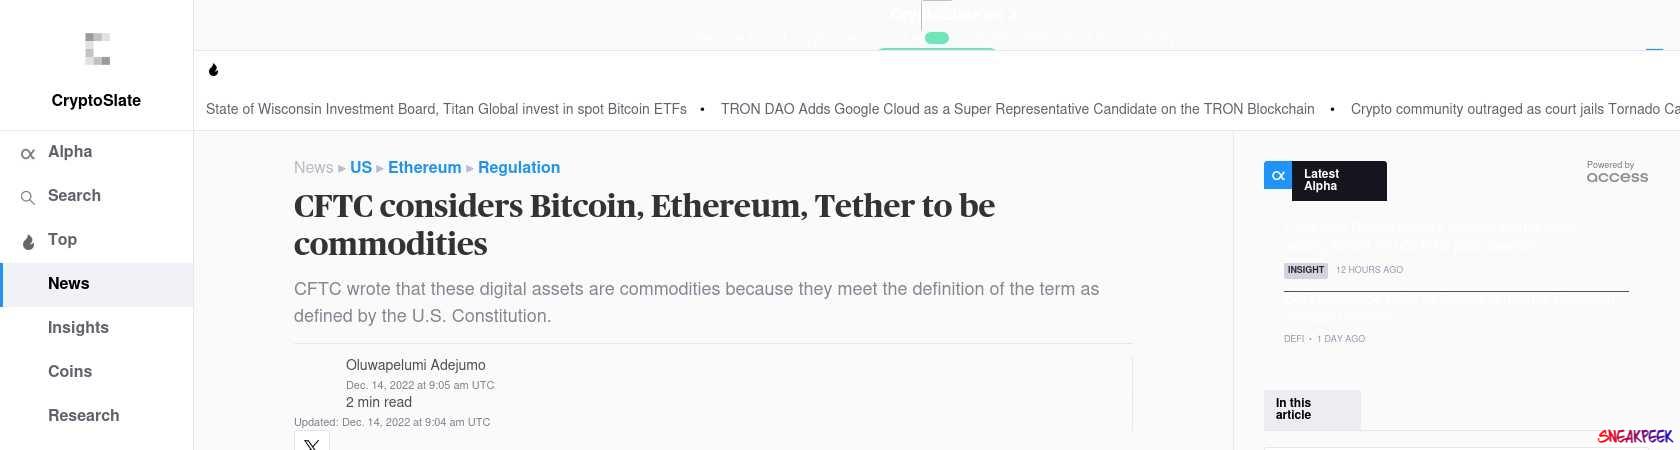 Read the full Article:  ⭲ CFTC considers Bitcoin, Ethereum, Tether to be commodities